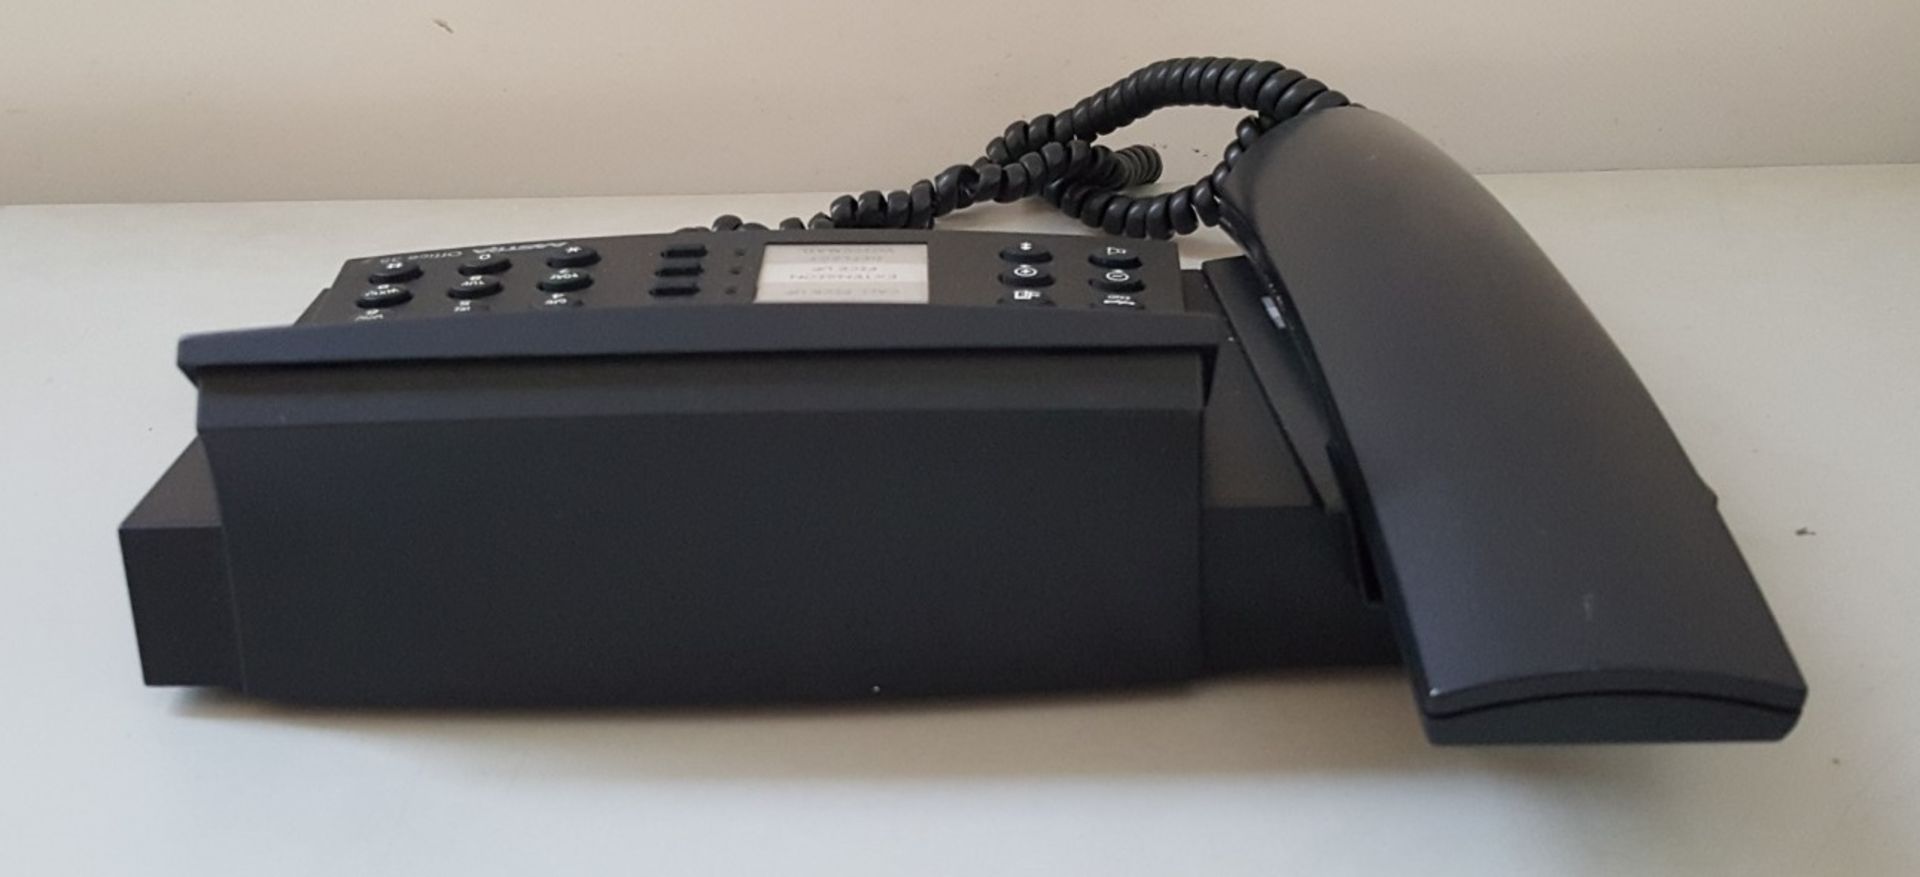 13 x Aastra Office 35 Digital Telephone Handsets Finished In Titanium Grey - Ref: LD383 - CL409 - - Image 3 of 5